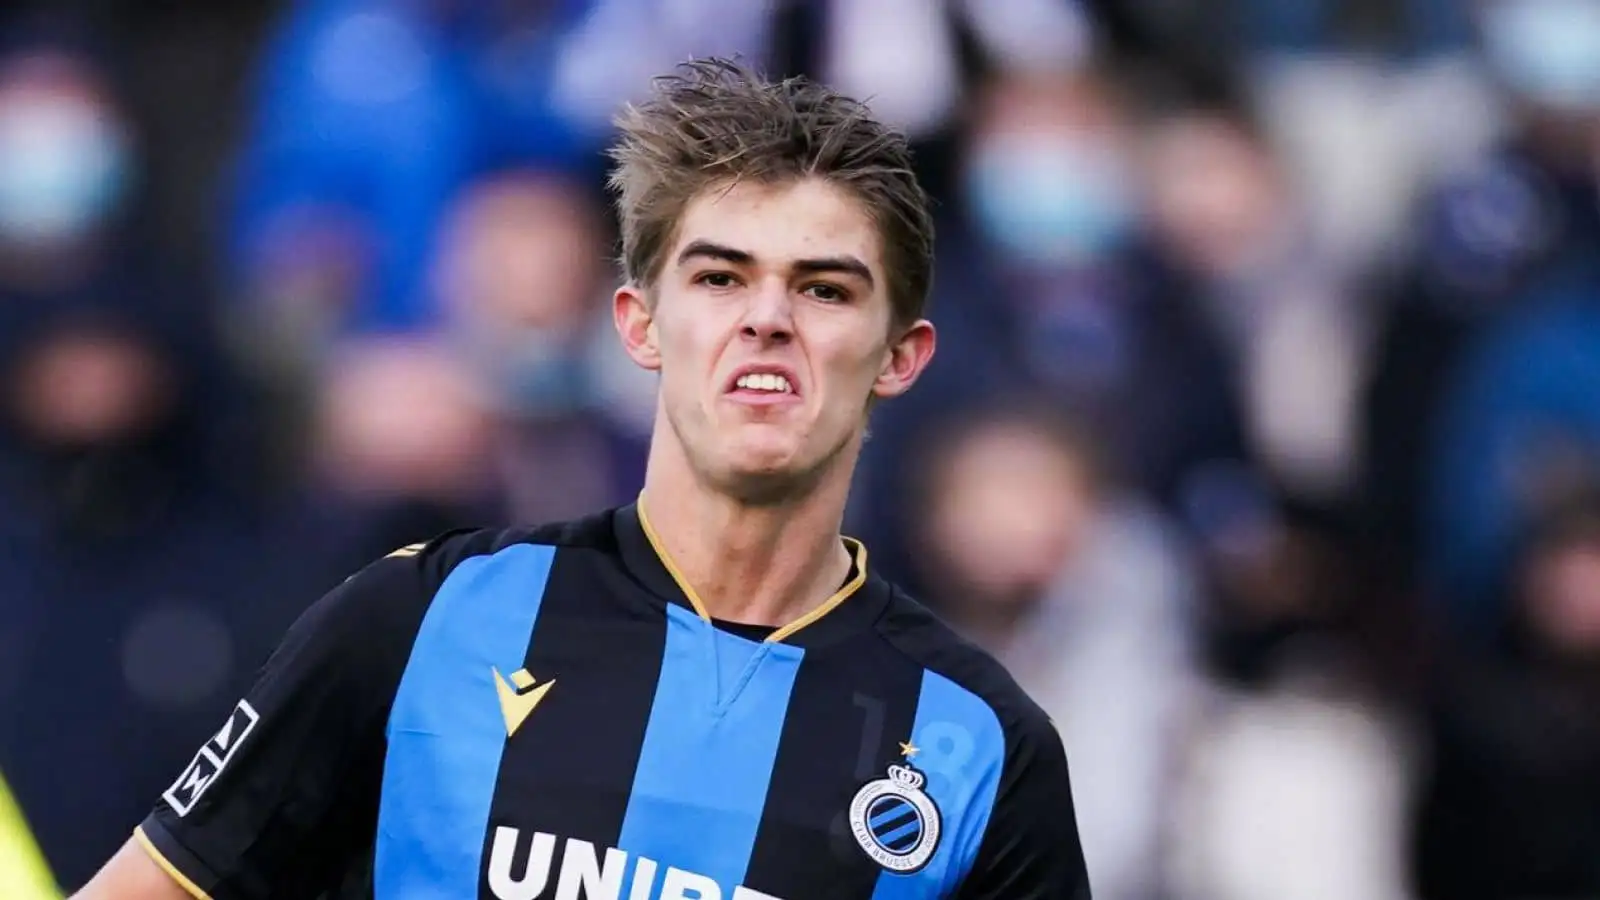 Charles De Ketelaere of Club Brugge during the Jupiler Pro League match between Club Brugge and KAA Gent